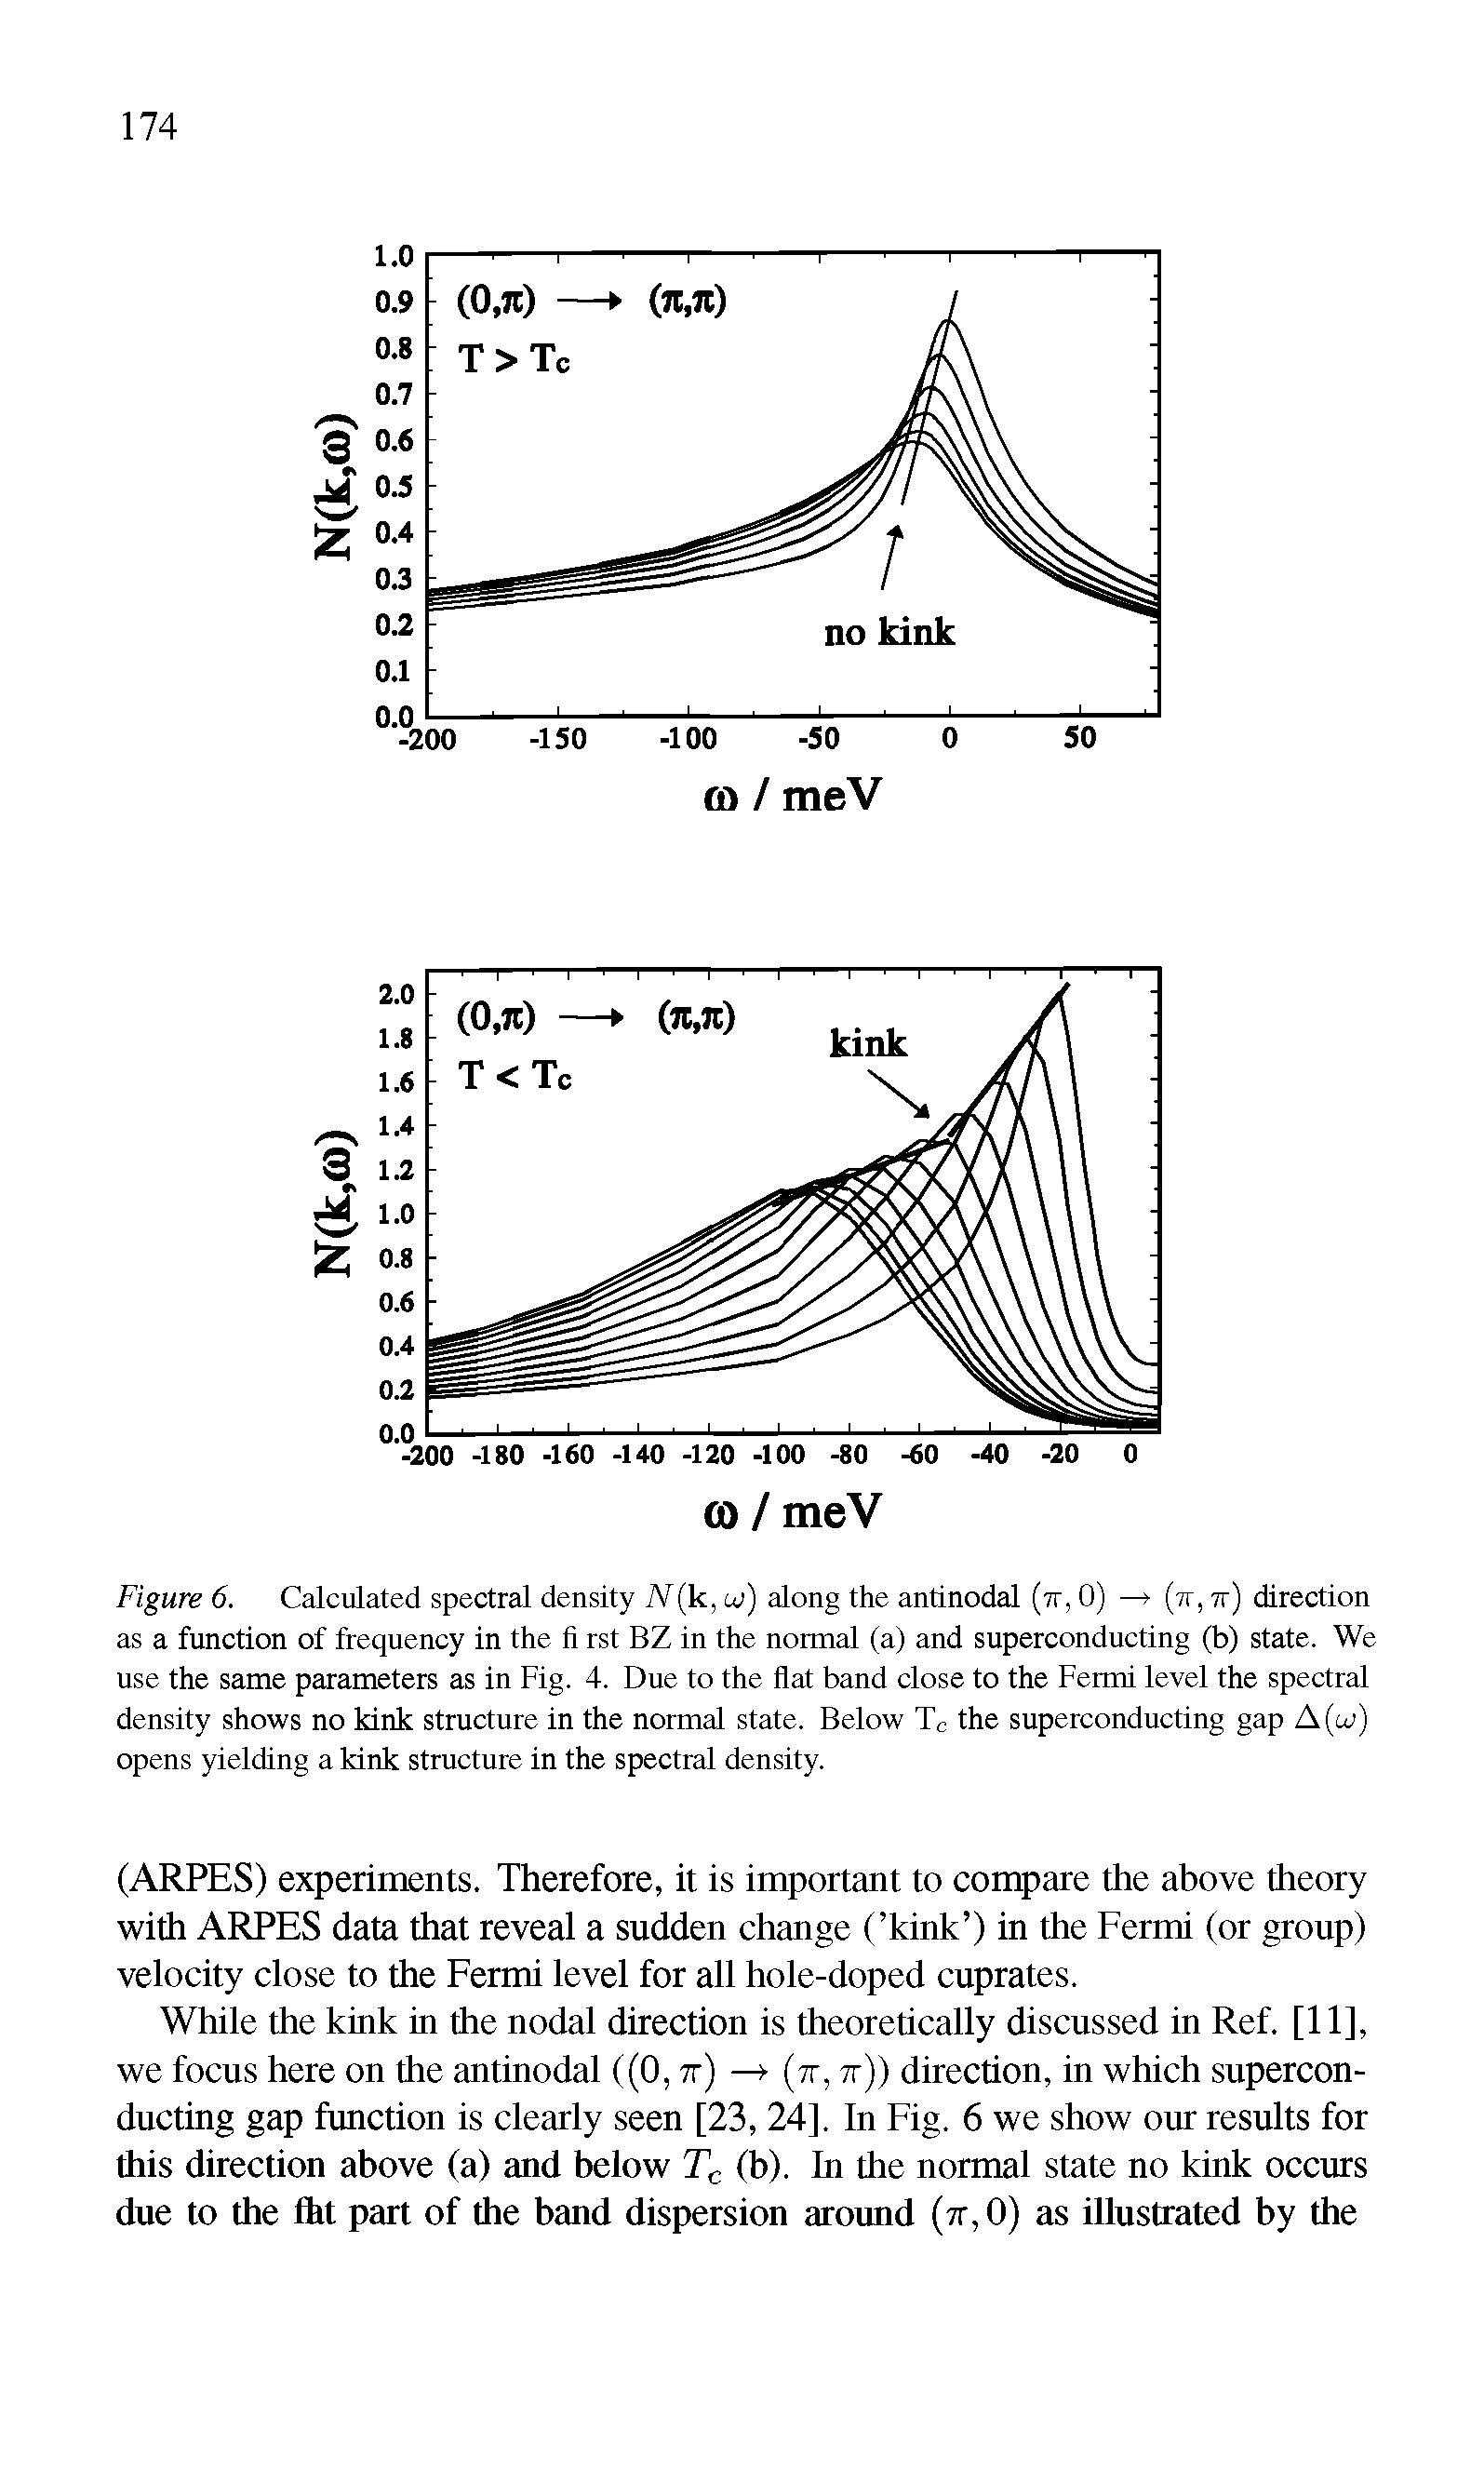 Figure 6. Calculated spectral density IV(k, lo) along the antinodal (7T, 0) — (tt, 7r) direction as a function of frequency in the fi rst BZ in the normal (a) and superconducting (b) state. We use the same parameters as in Fig. 4. Due to the flat band close to the Fermi level the spectral density shows no kink structure in the normal state. Below Tc the superconducting gap A(u>) opens yielding a kink structure in the spectral density.